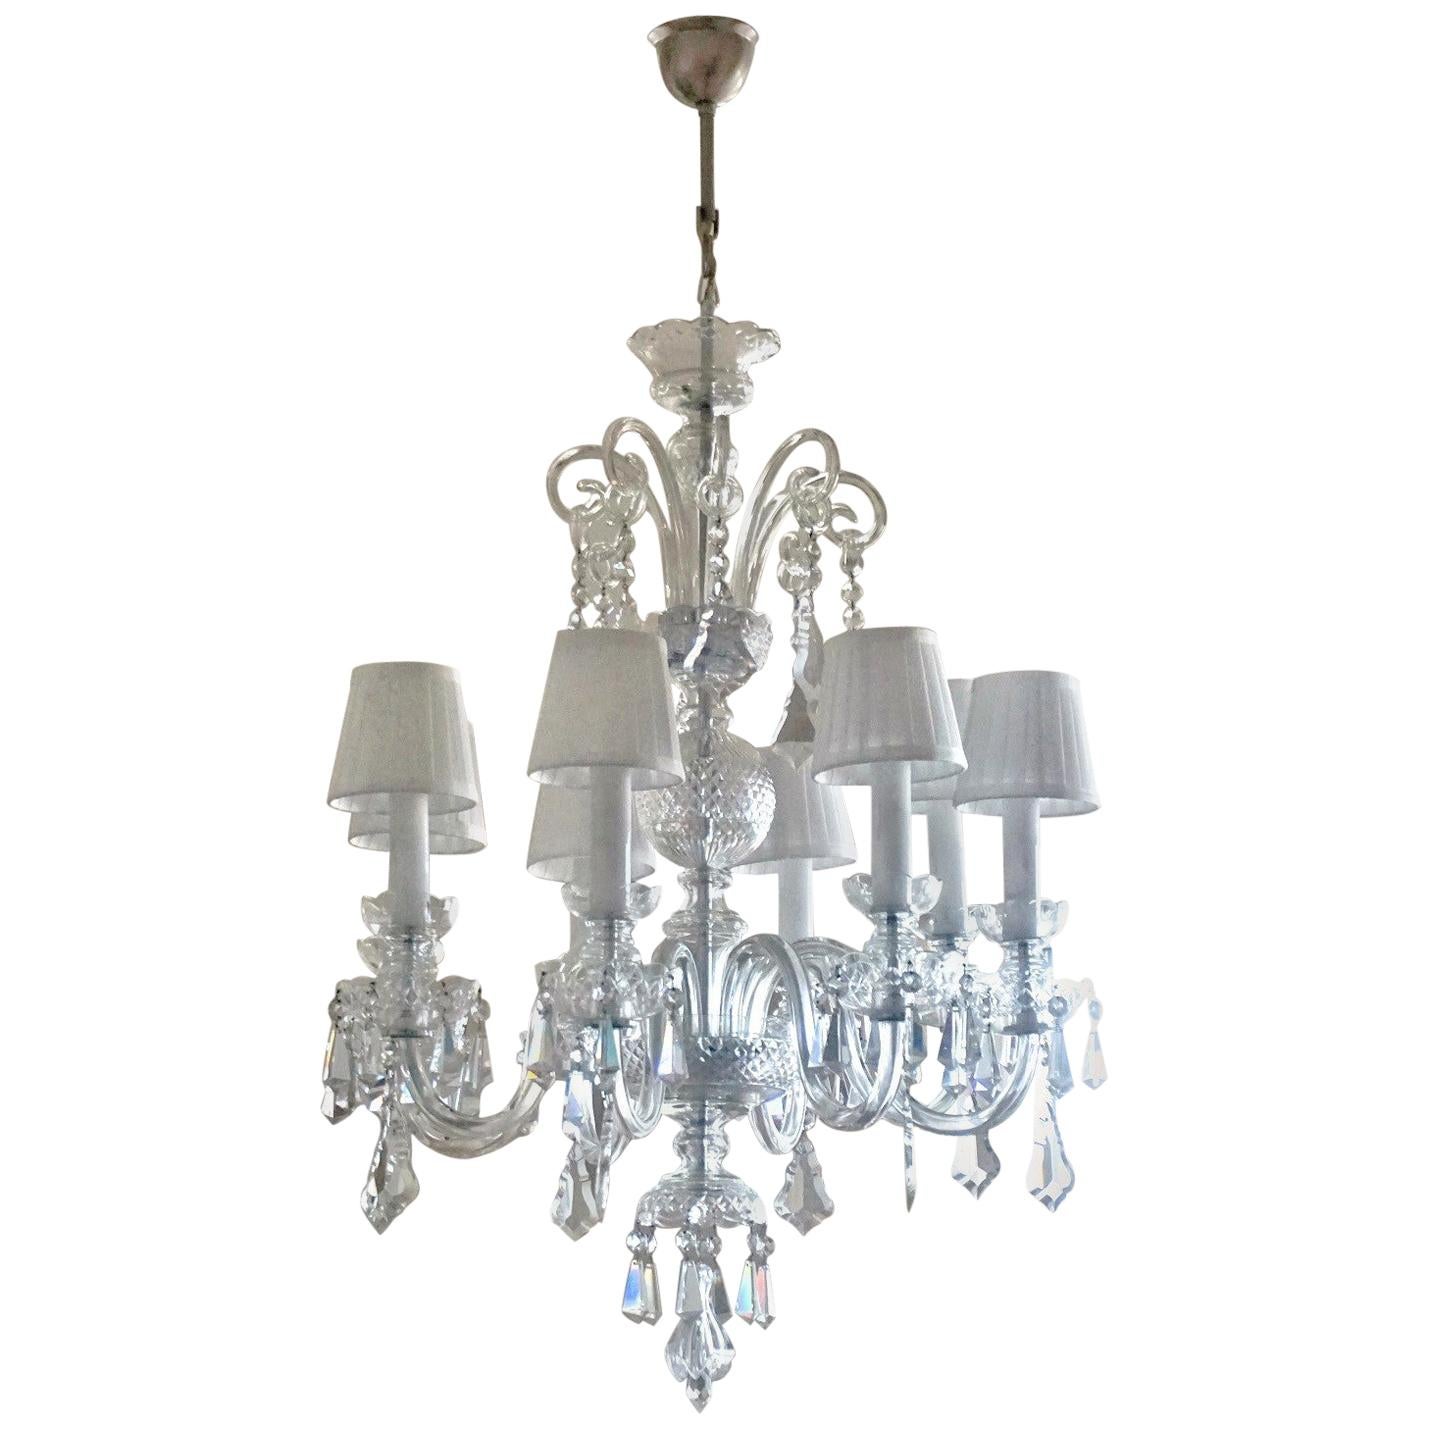 Large Original Venetian Handcrafted Murano Crystal Chandelier, Italy, 1910-1920 For Sale